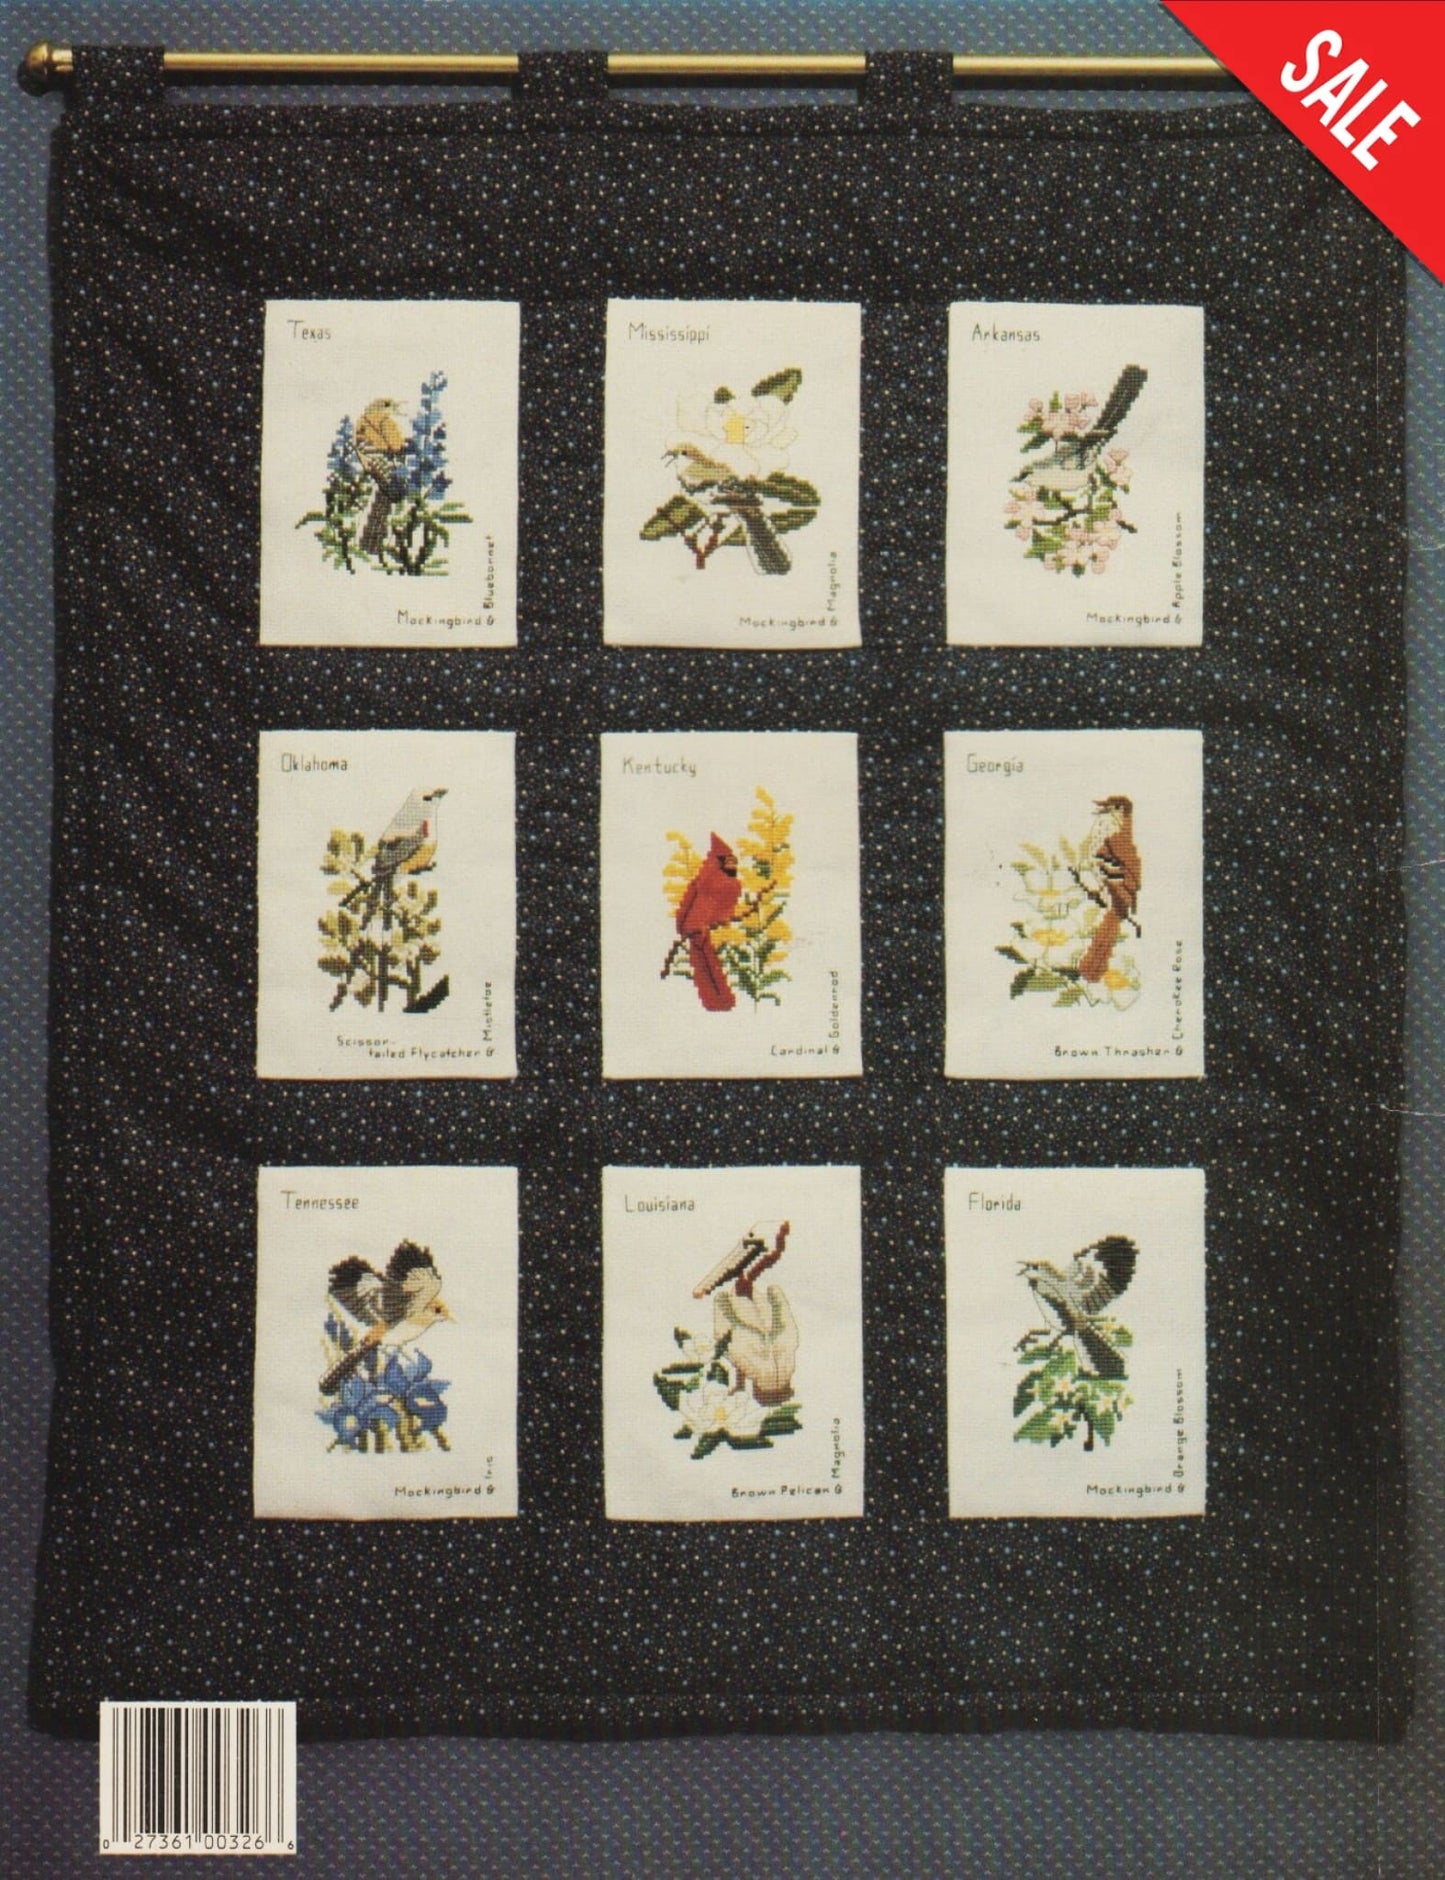 State Birds And Flower Stamps Bk2 The South Pattern Pattern